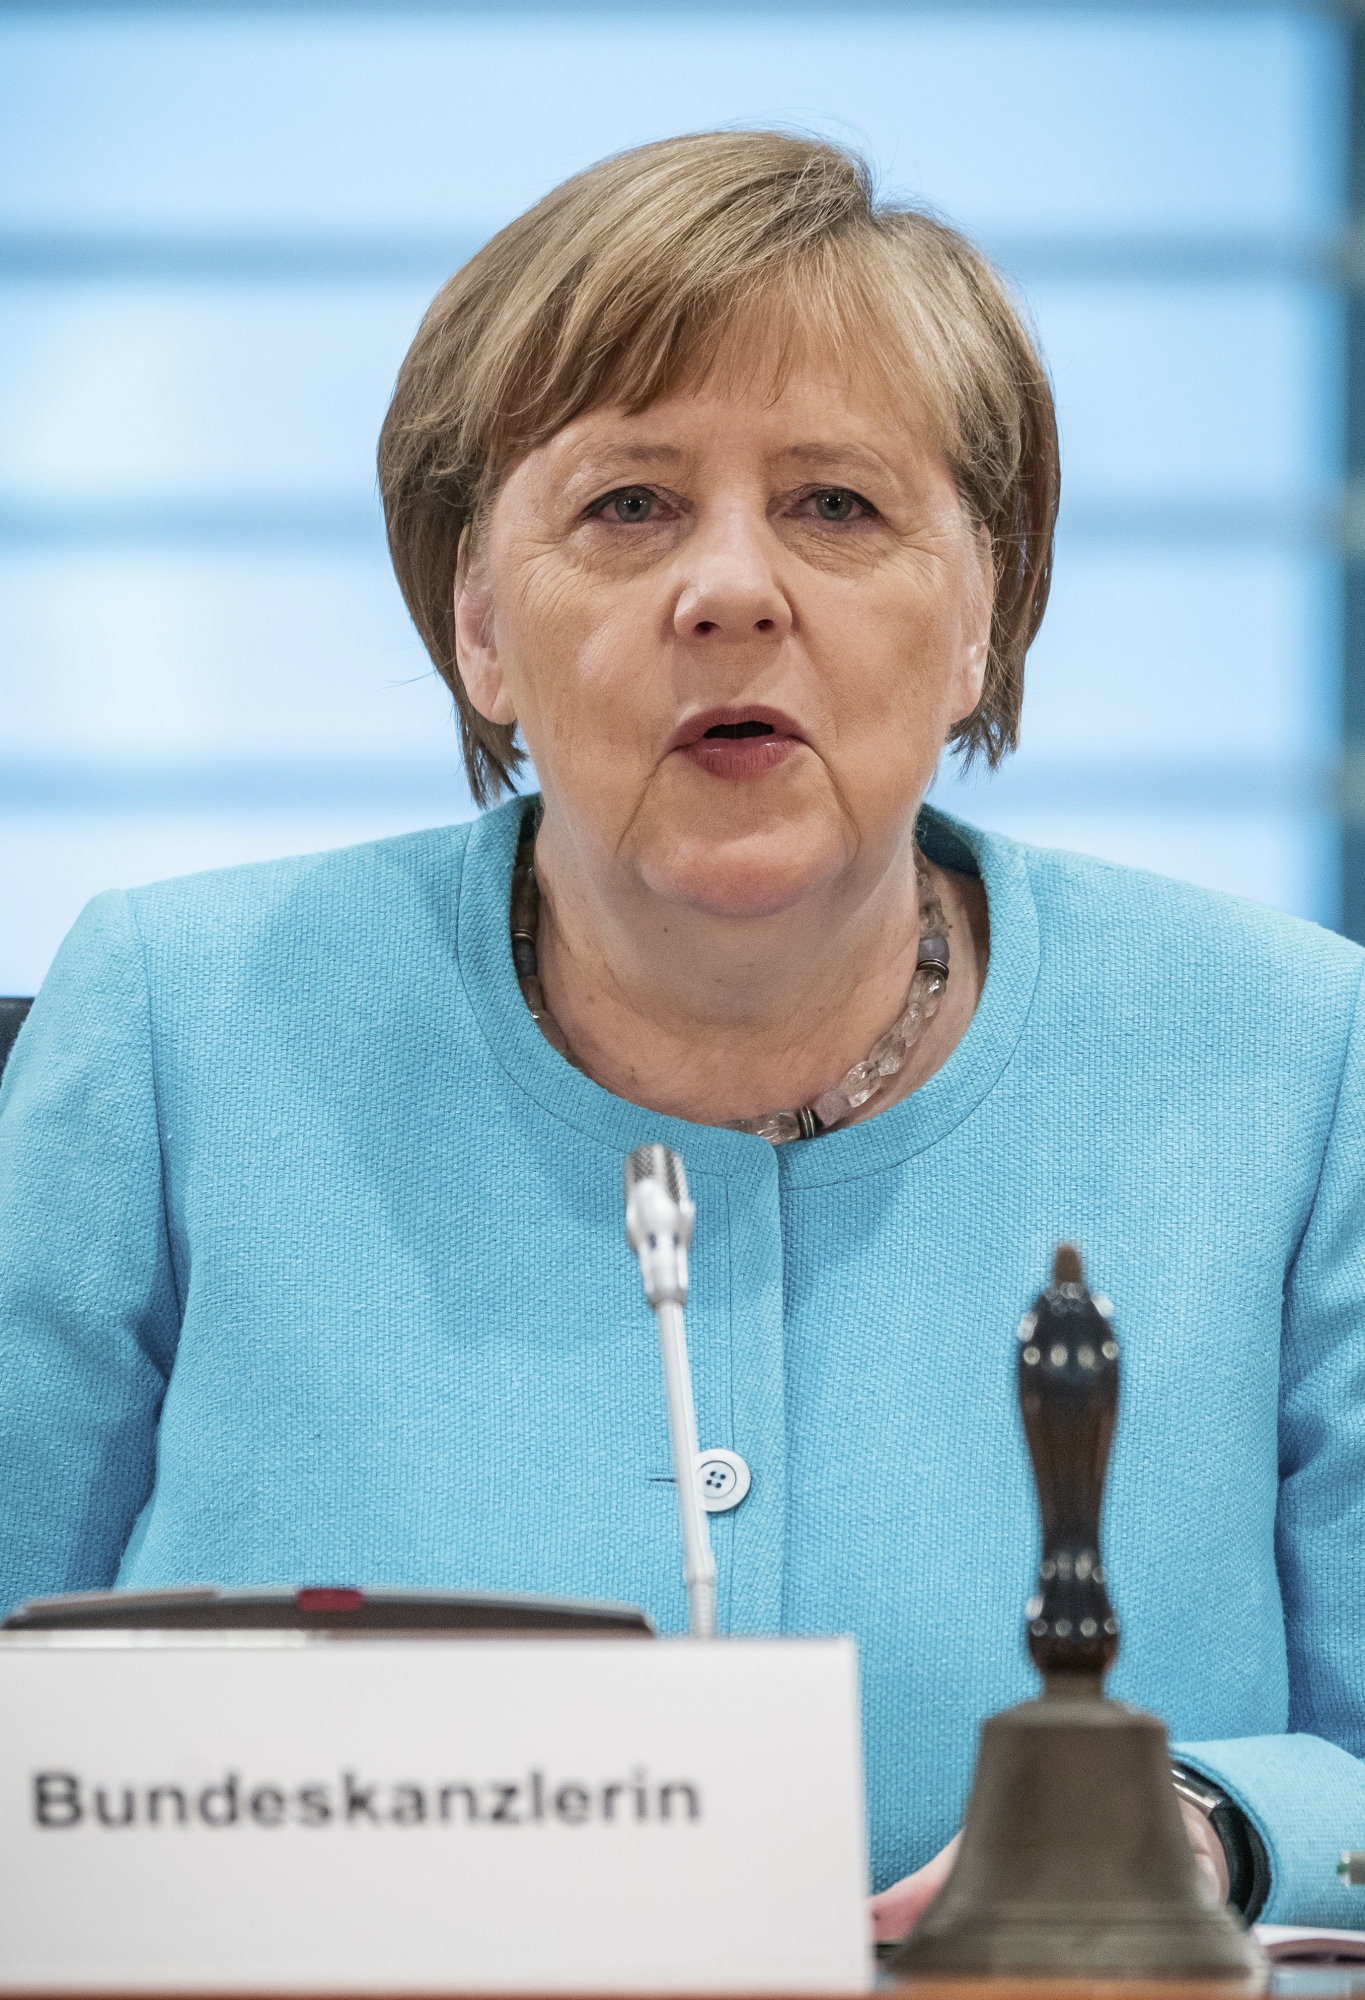 German Chancellor Angela Merkel attends the weekly cabinet meeting at the Chancellery in Berlin, Germany, Wednesday, June 3, 2020. (Michael Kappeler/DPA via AP, Pool)
ArcInfo